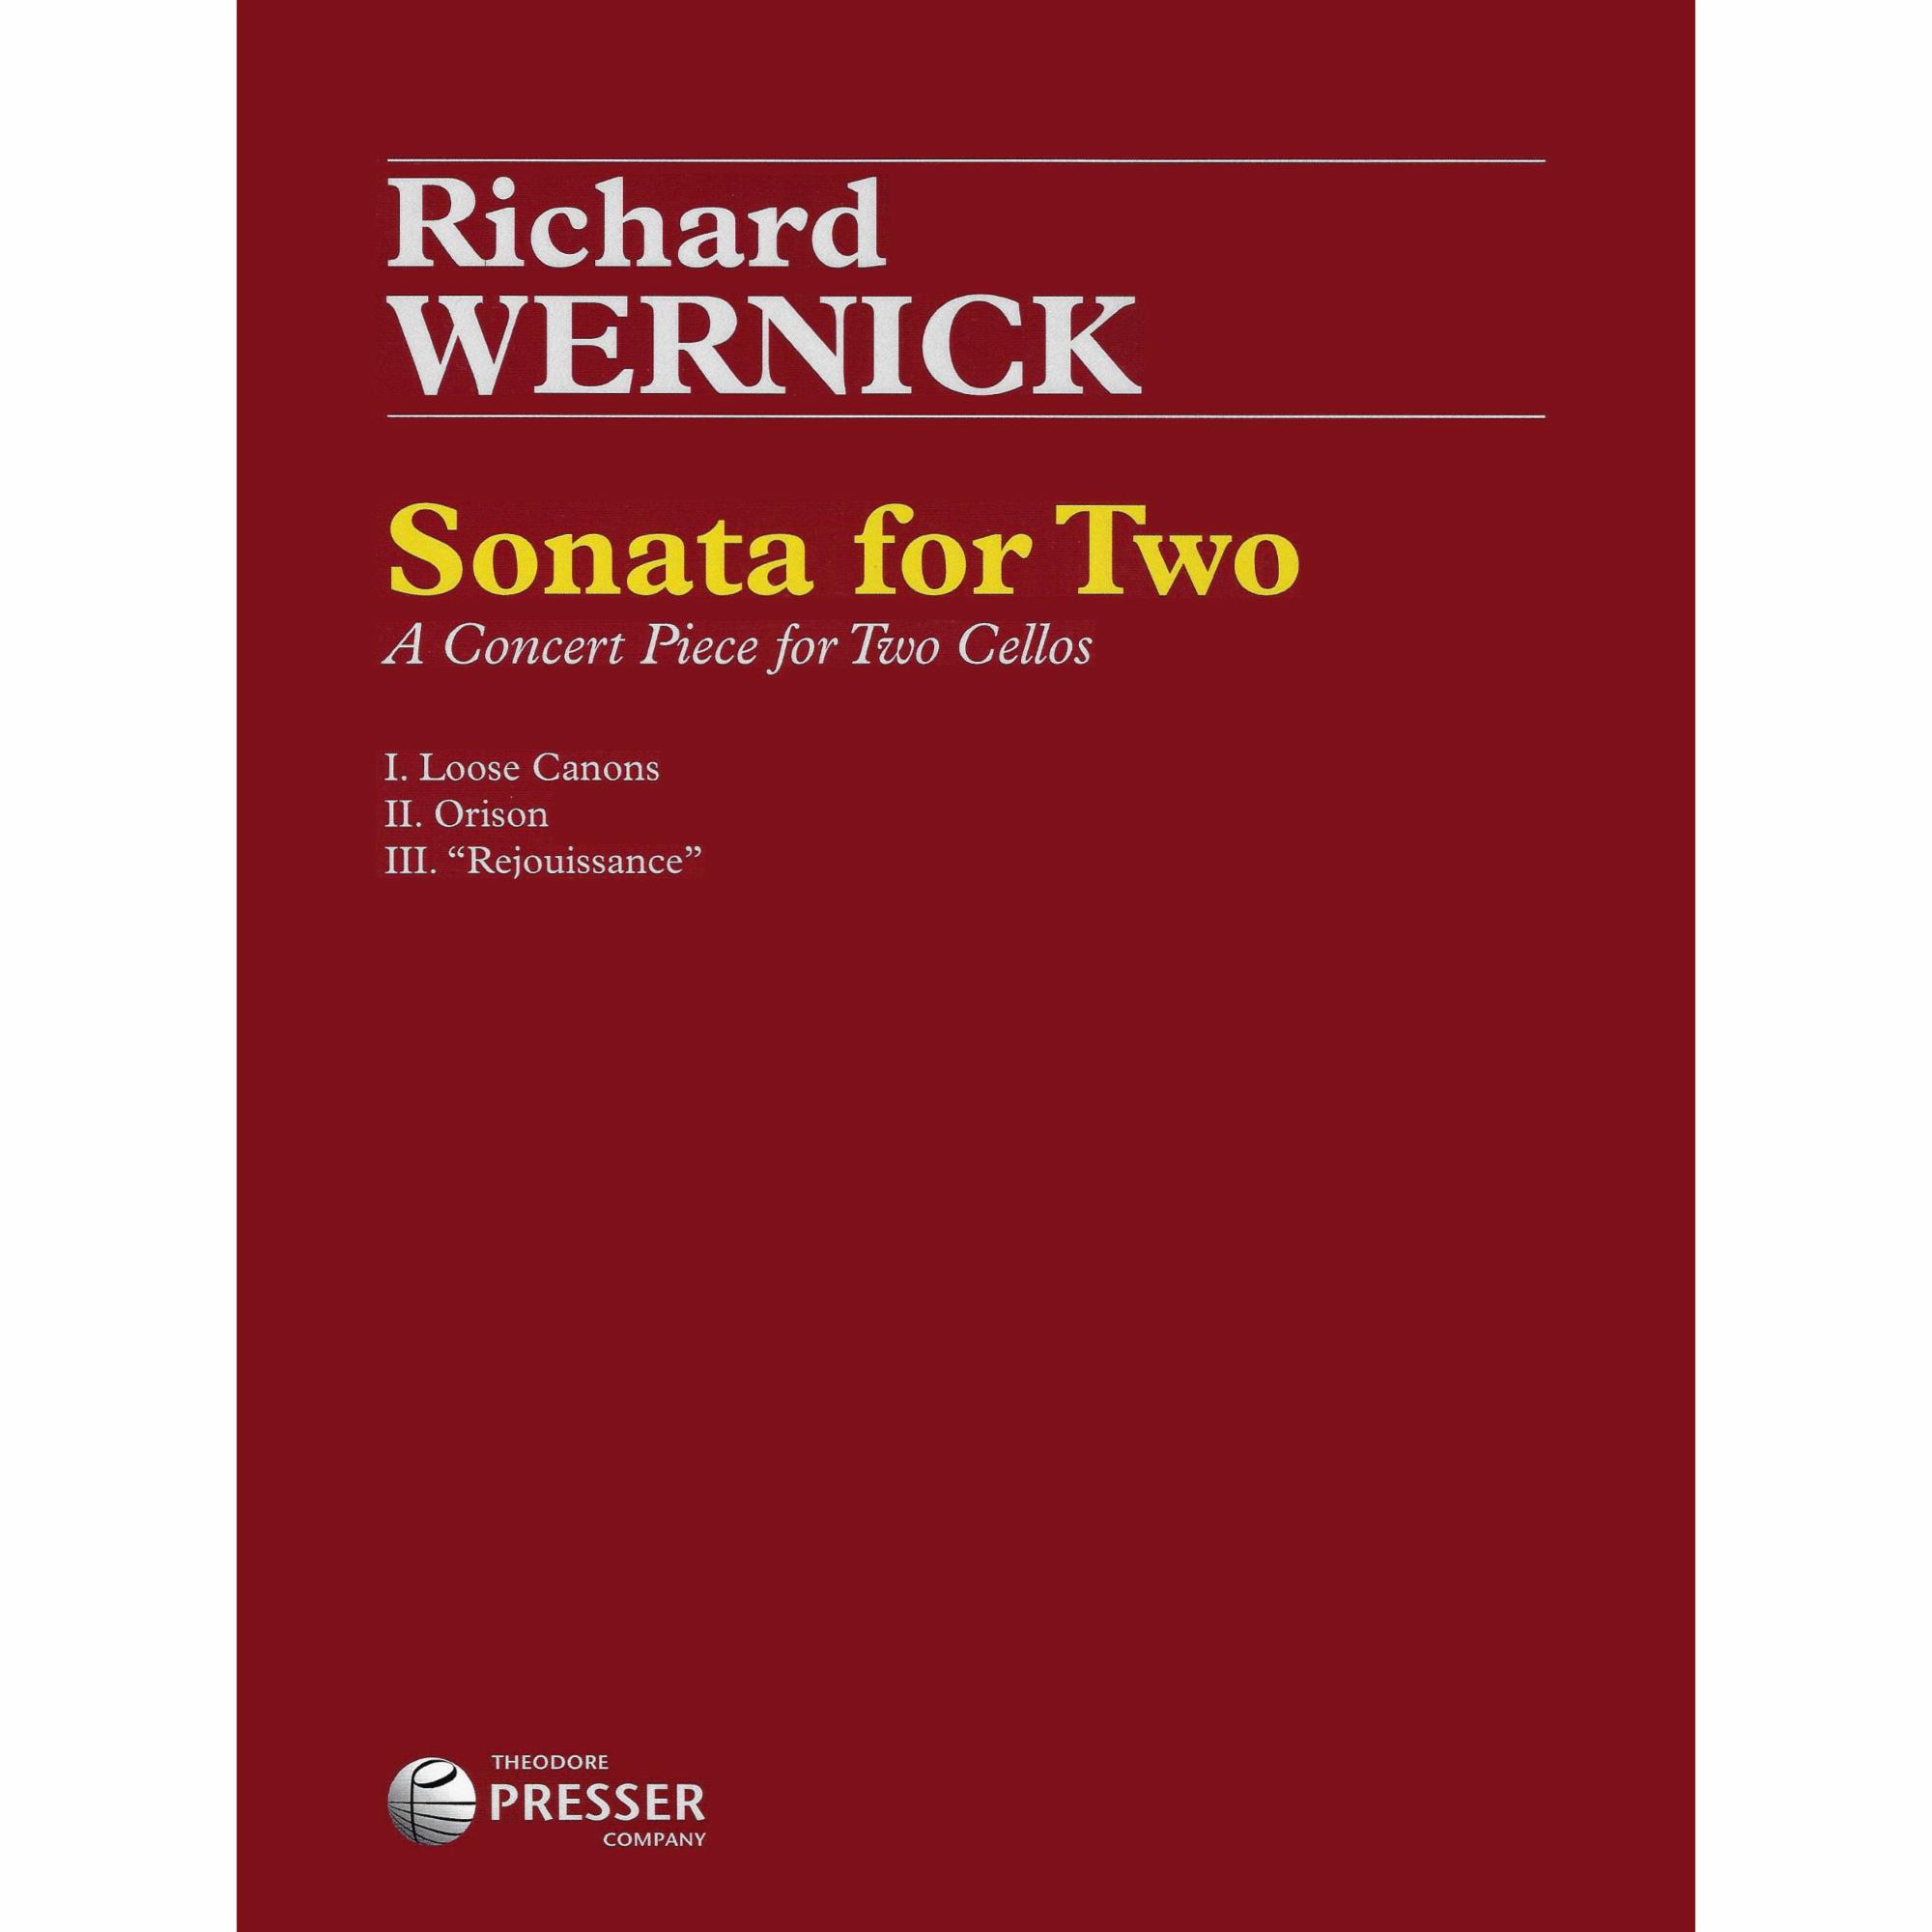 Wernick -- Sonata for Two: A Concert Piece for Two Cellos